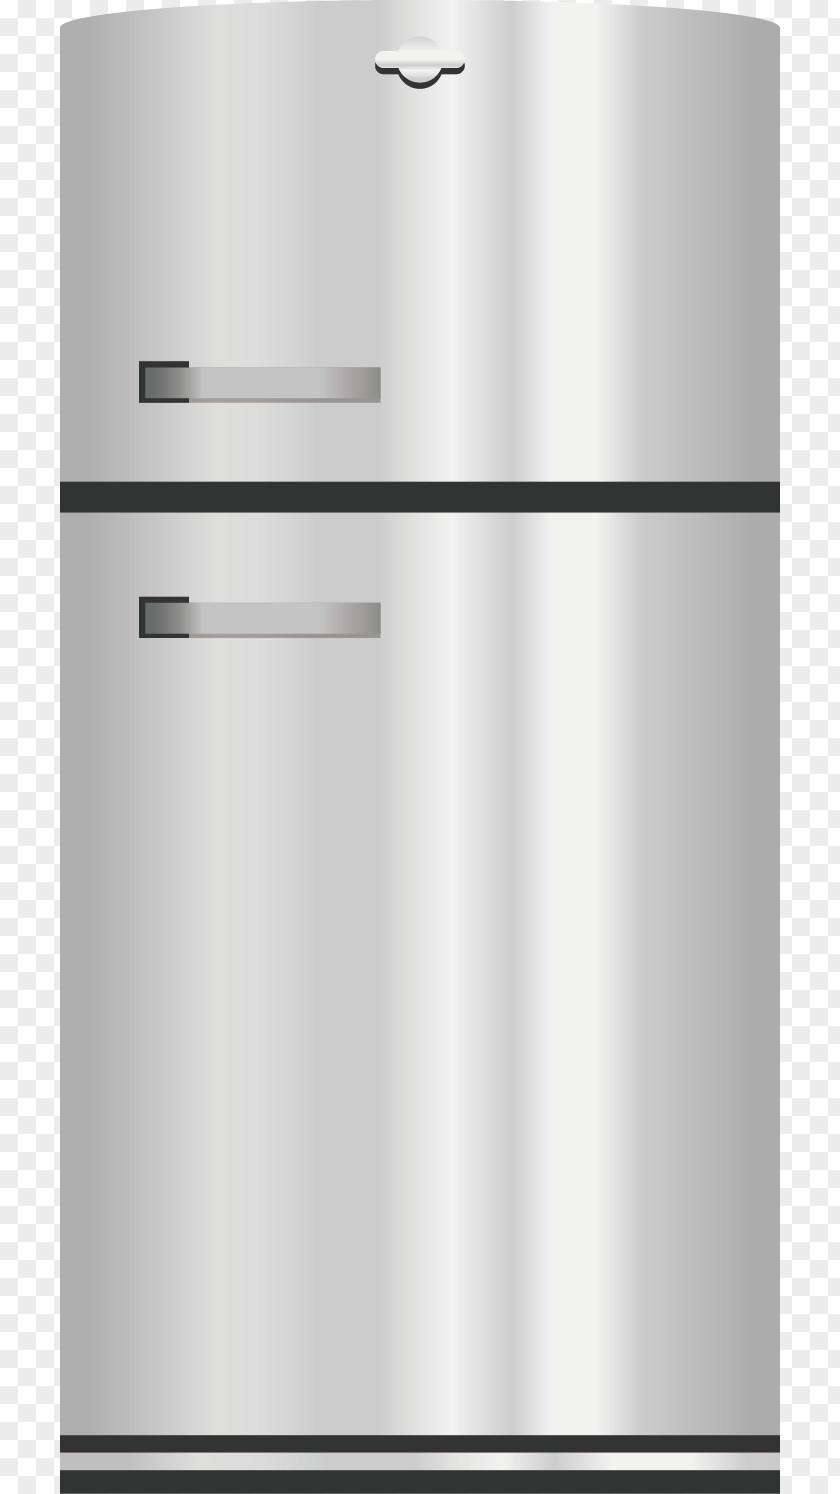 Refrigerator Major Appliance Black And White Home PNG